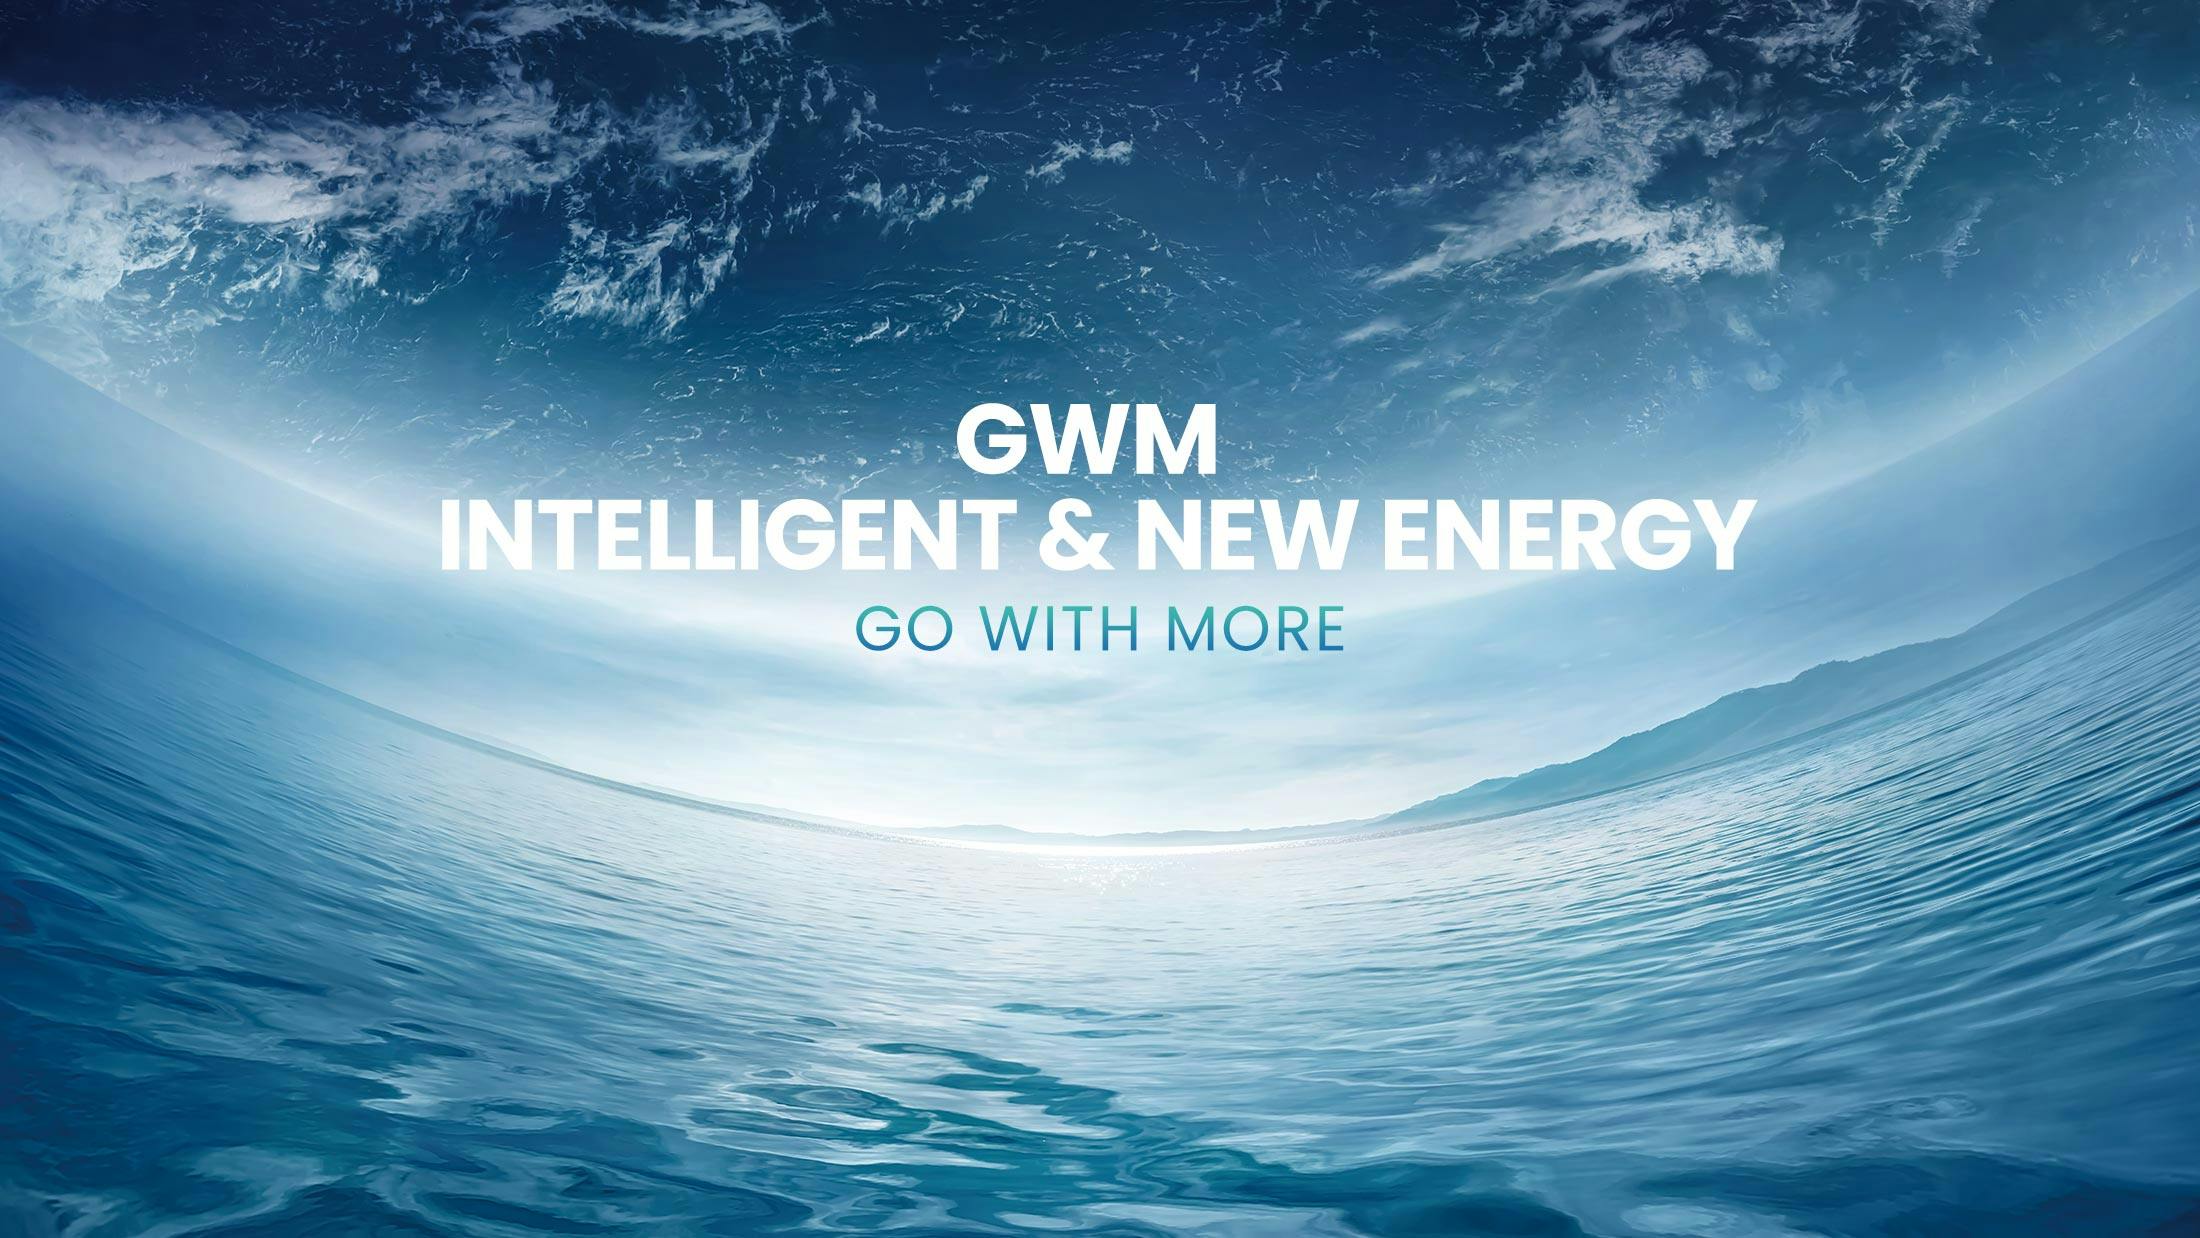 GWM Intelligent & New Energy | GO WITH MORE